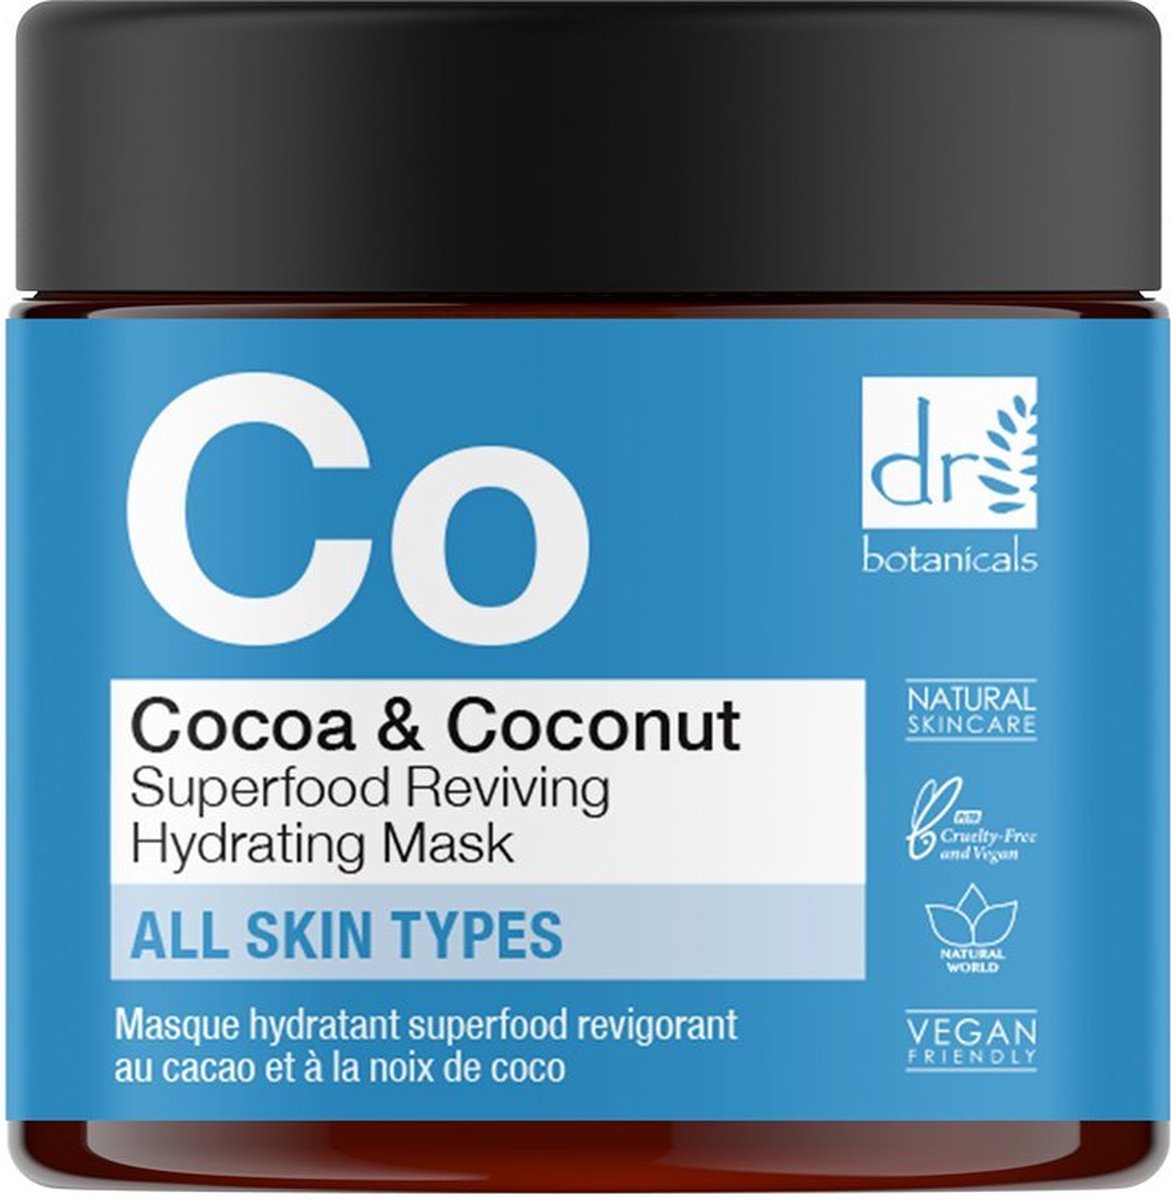 Dr Botanicals Cocoa & Coconut Superfood Reviving Hydrating Mask Vrouwen 60 ml 1 stuk(s)